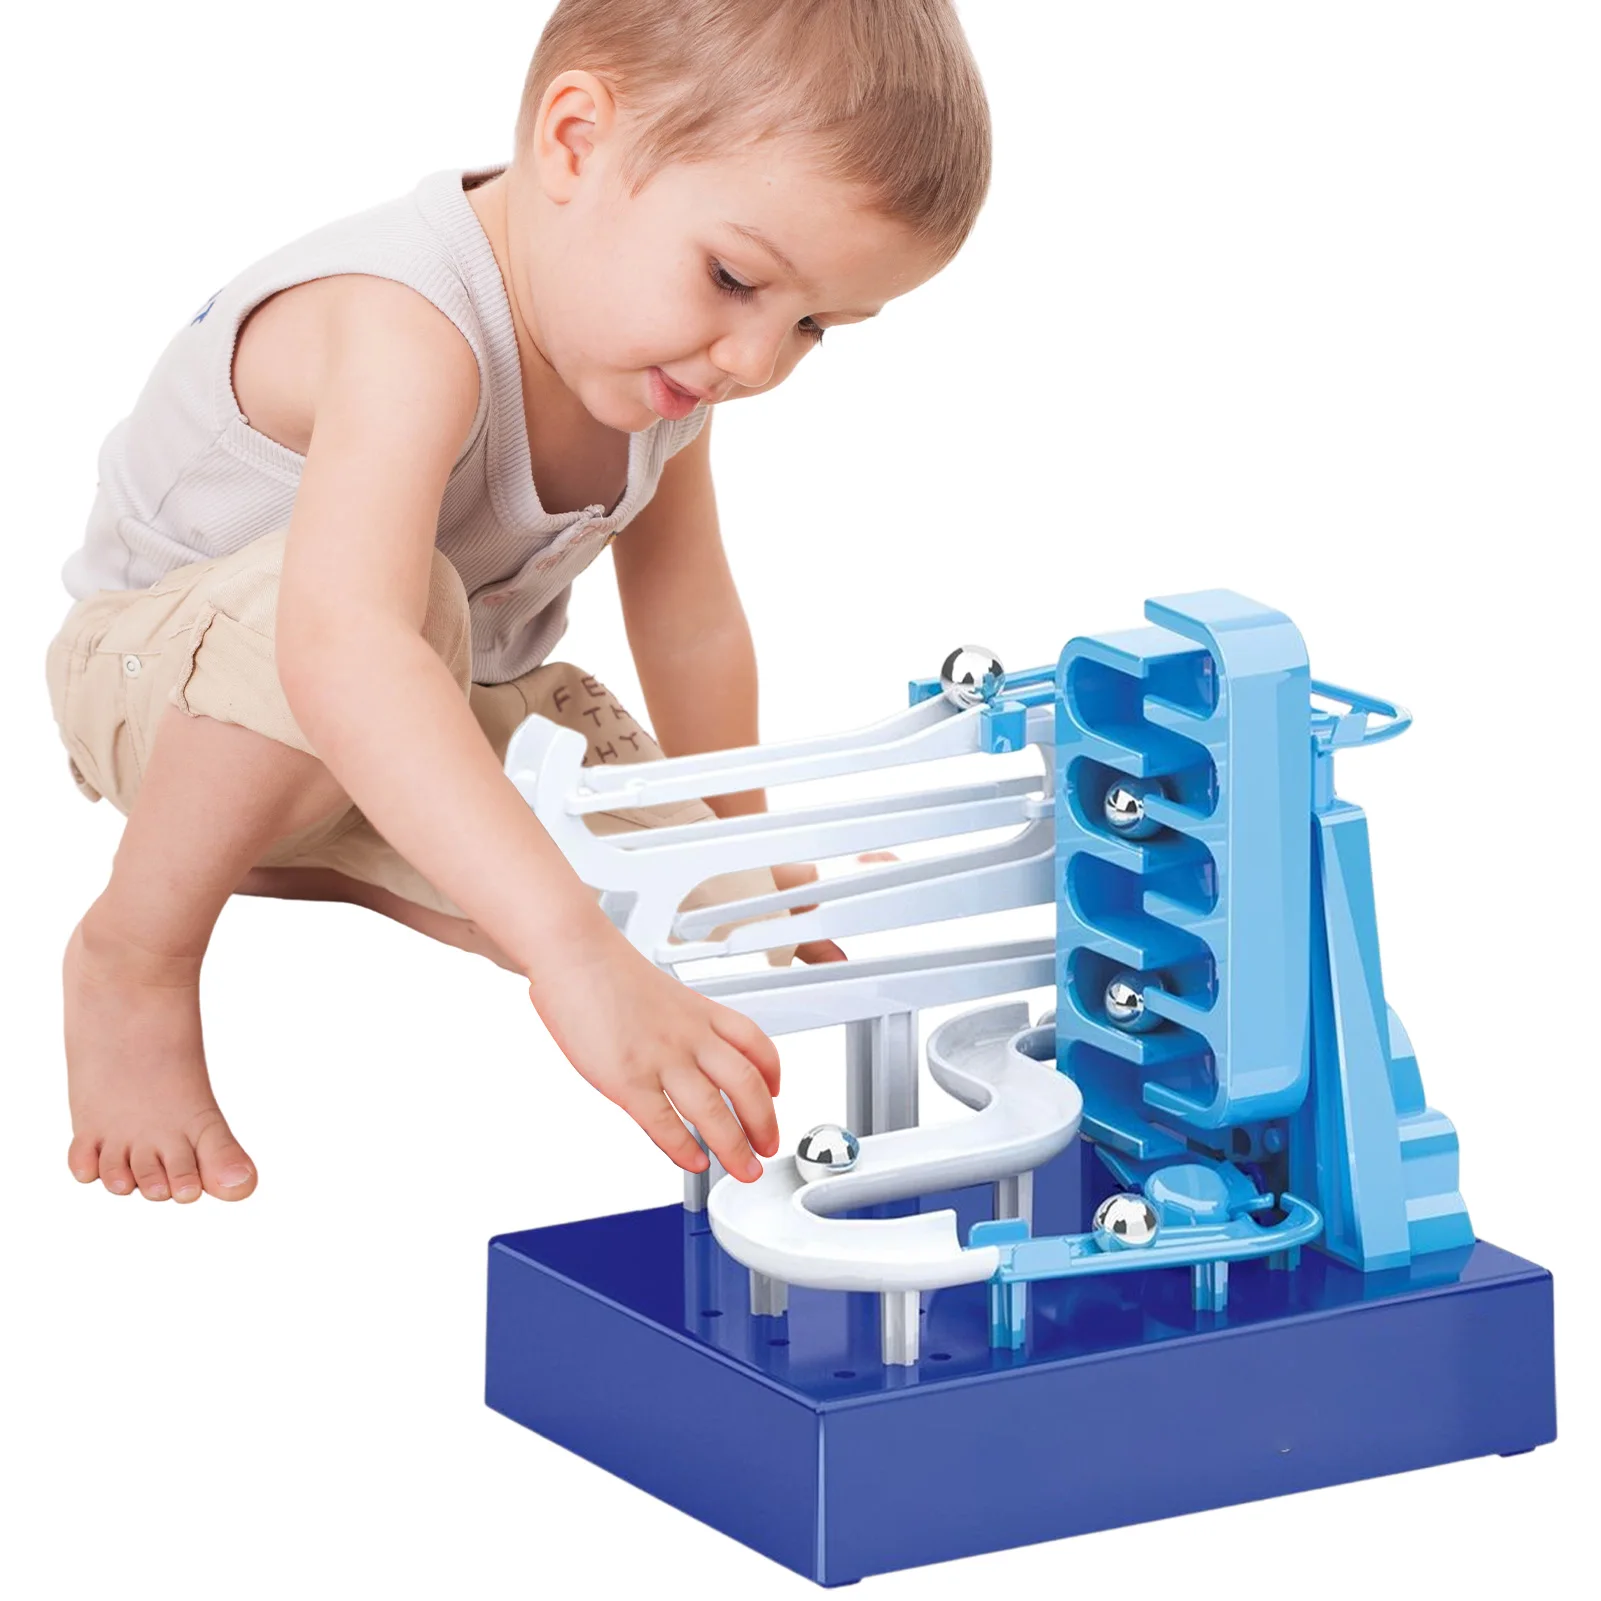 

Marble Race Track Game Marble Runs Toy Construction Building Blocks Innovative STEM Maze Toy Fabulous Birthday Gifts For Kids Bo